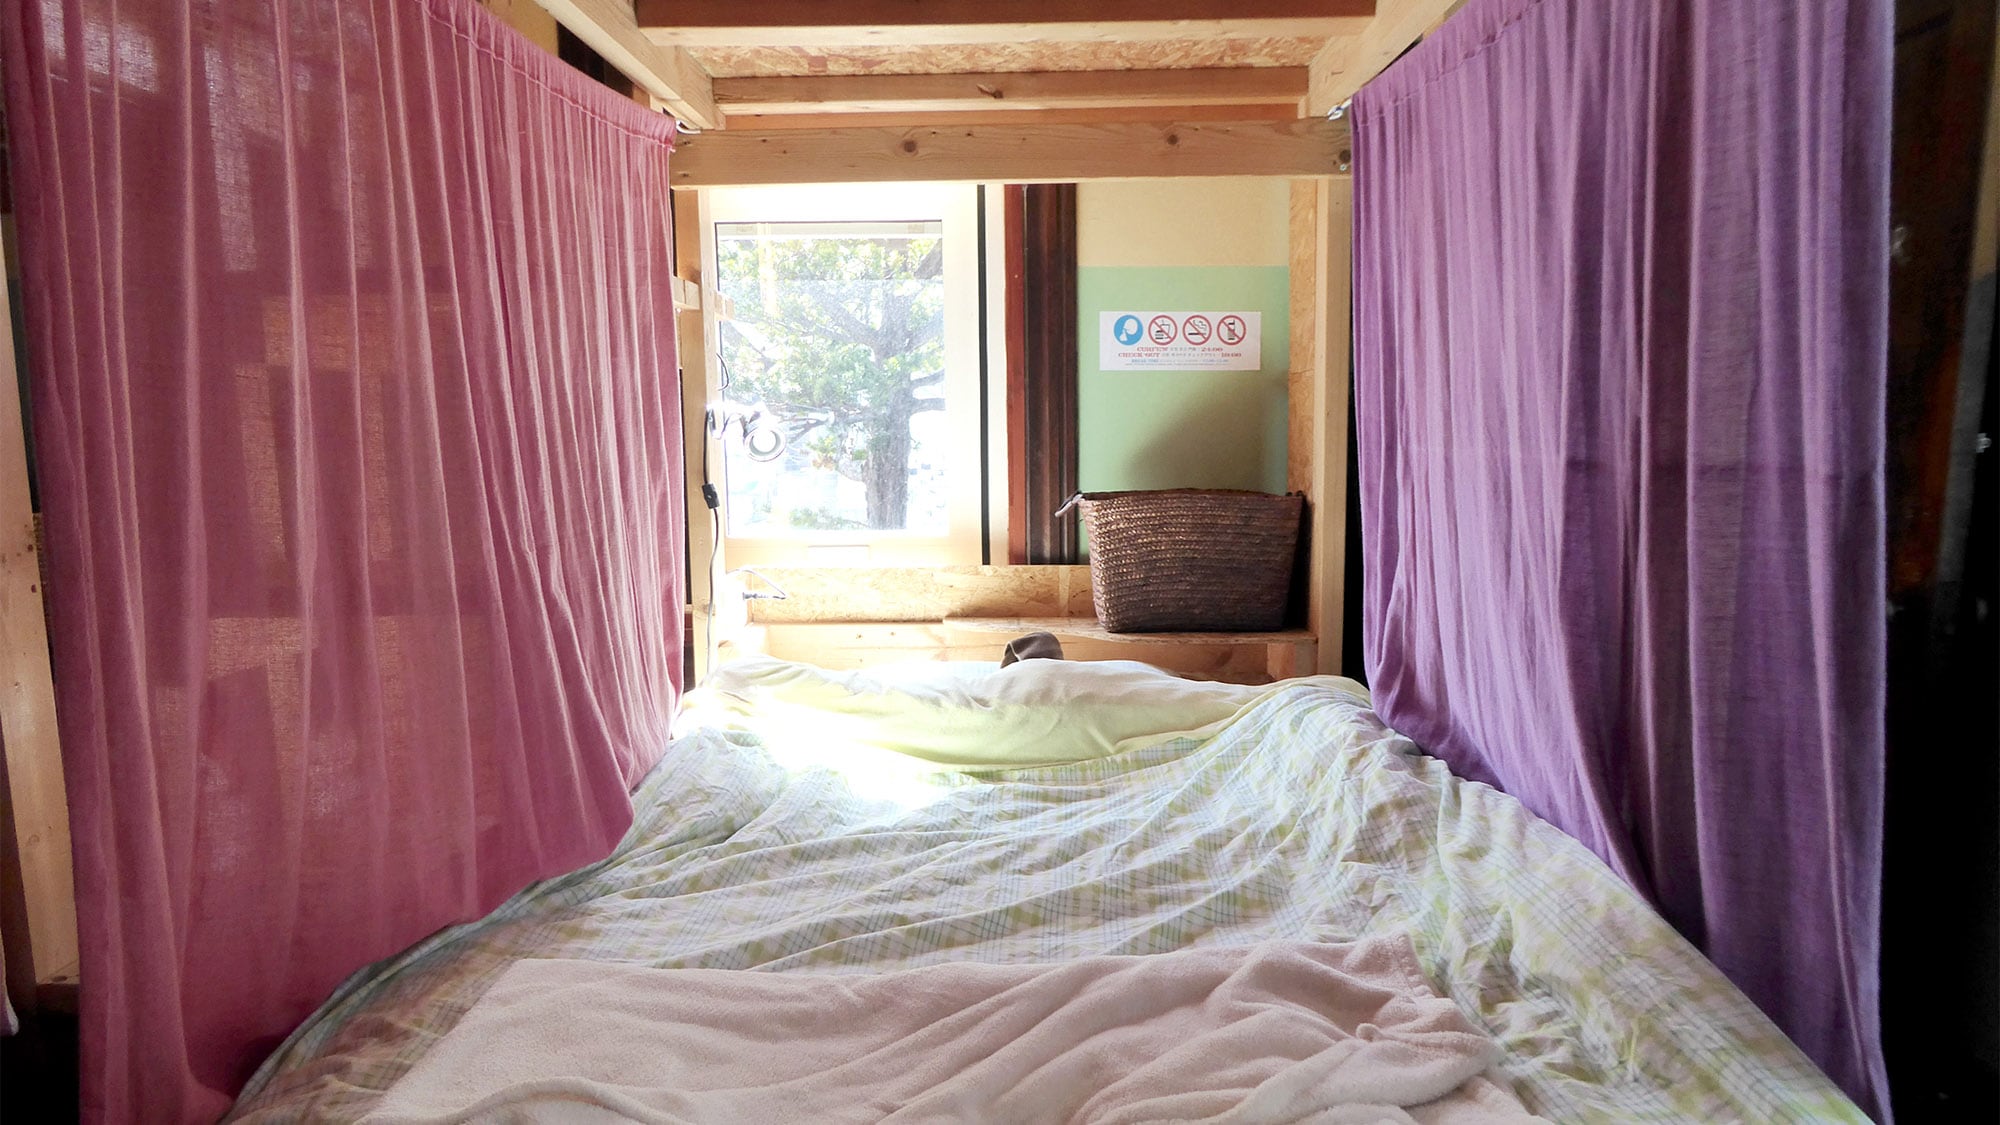 ・ Dormitory (all bunk beds, shared room)